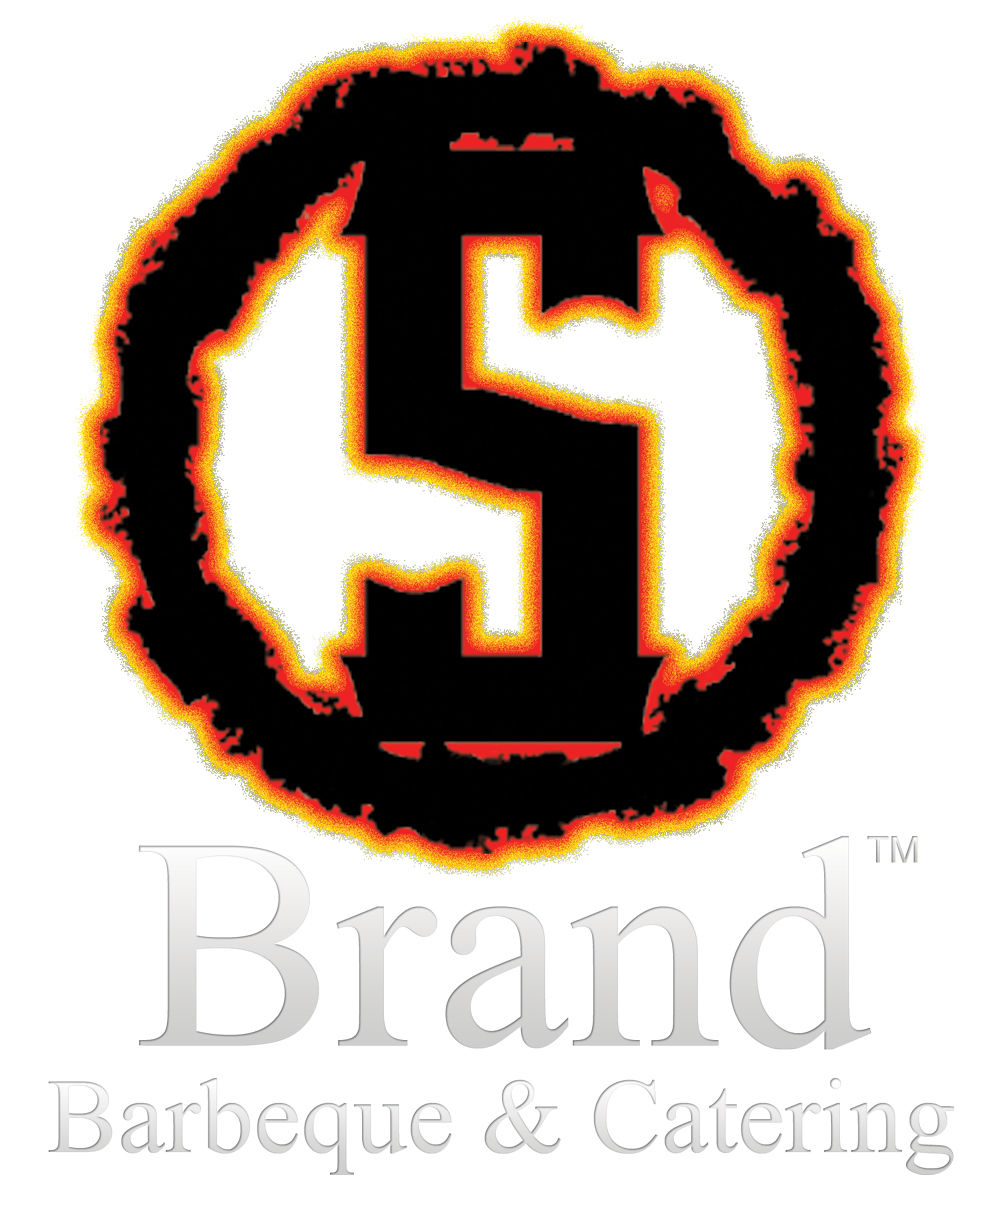 S-Brand BBQ & Catering